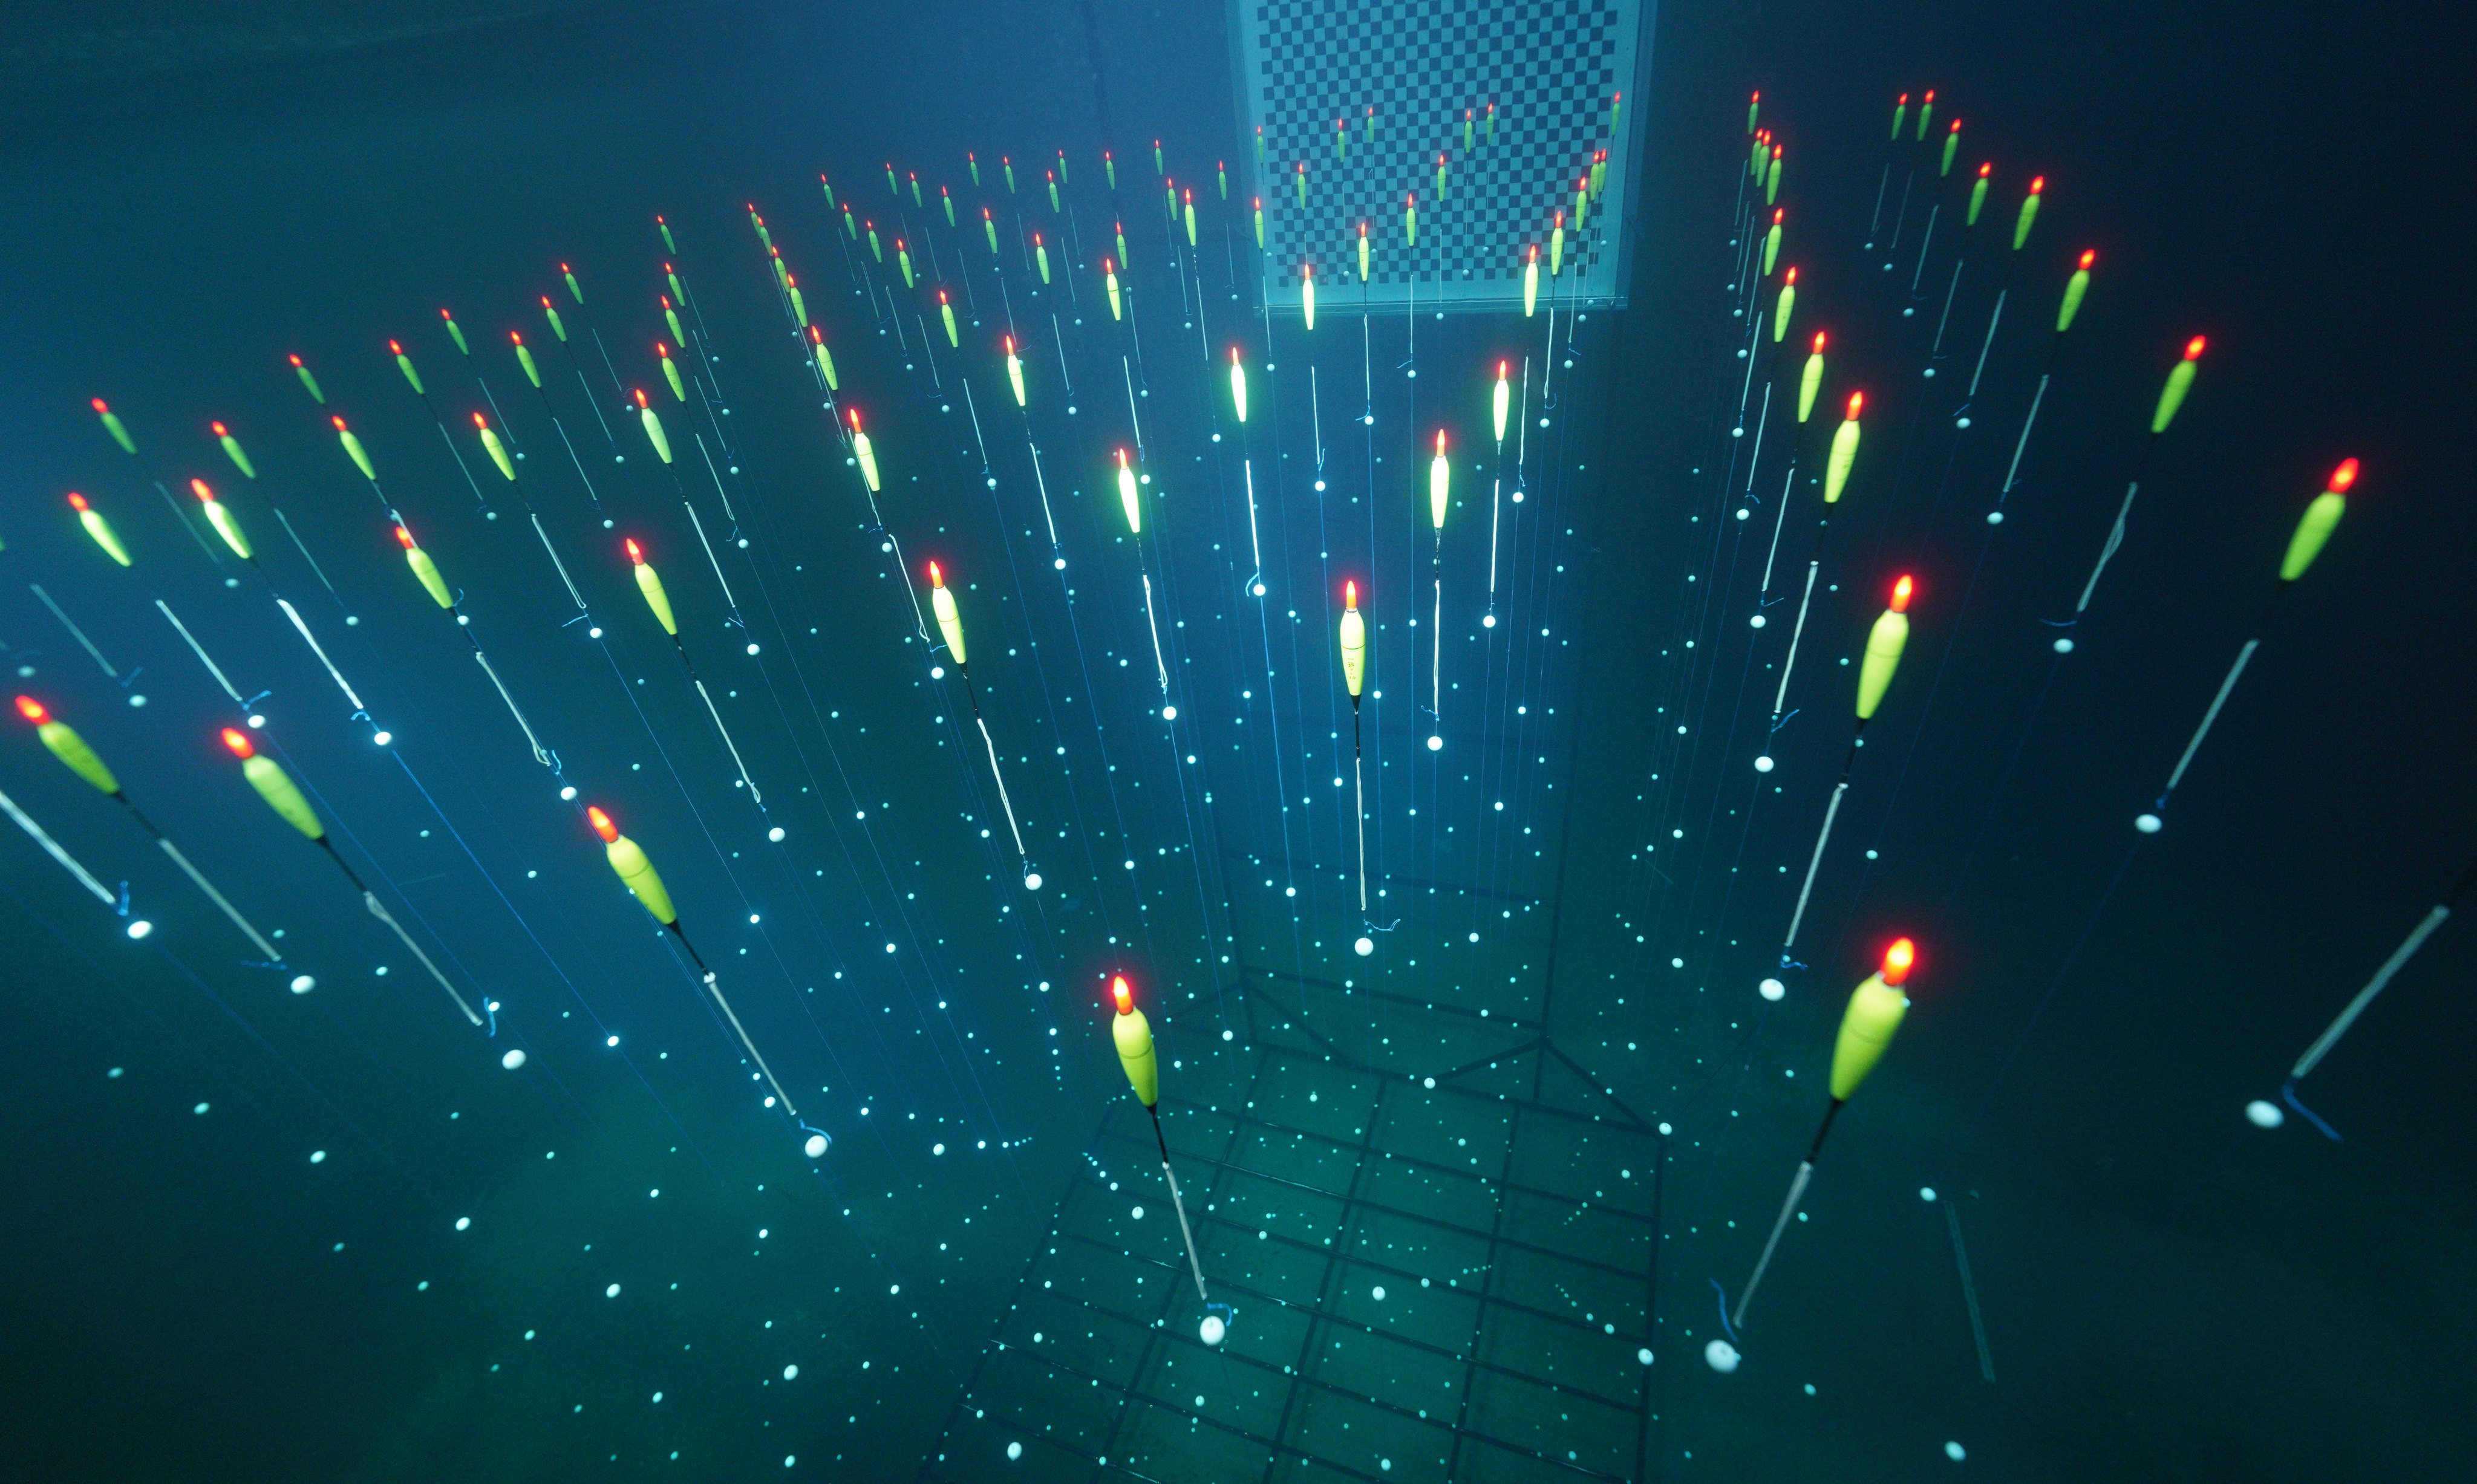 China’s Tropical Deep-sea Neutrino Telescope will consist of 1,200 strings of sensors anchored to the seabed 3.5km (2.2 miles) below the South China Sea. Illustration: Shanghai Jiao Tong University